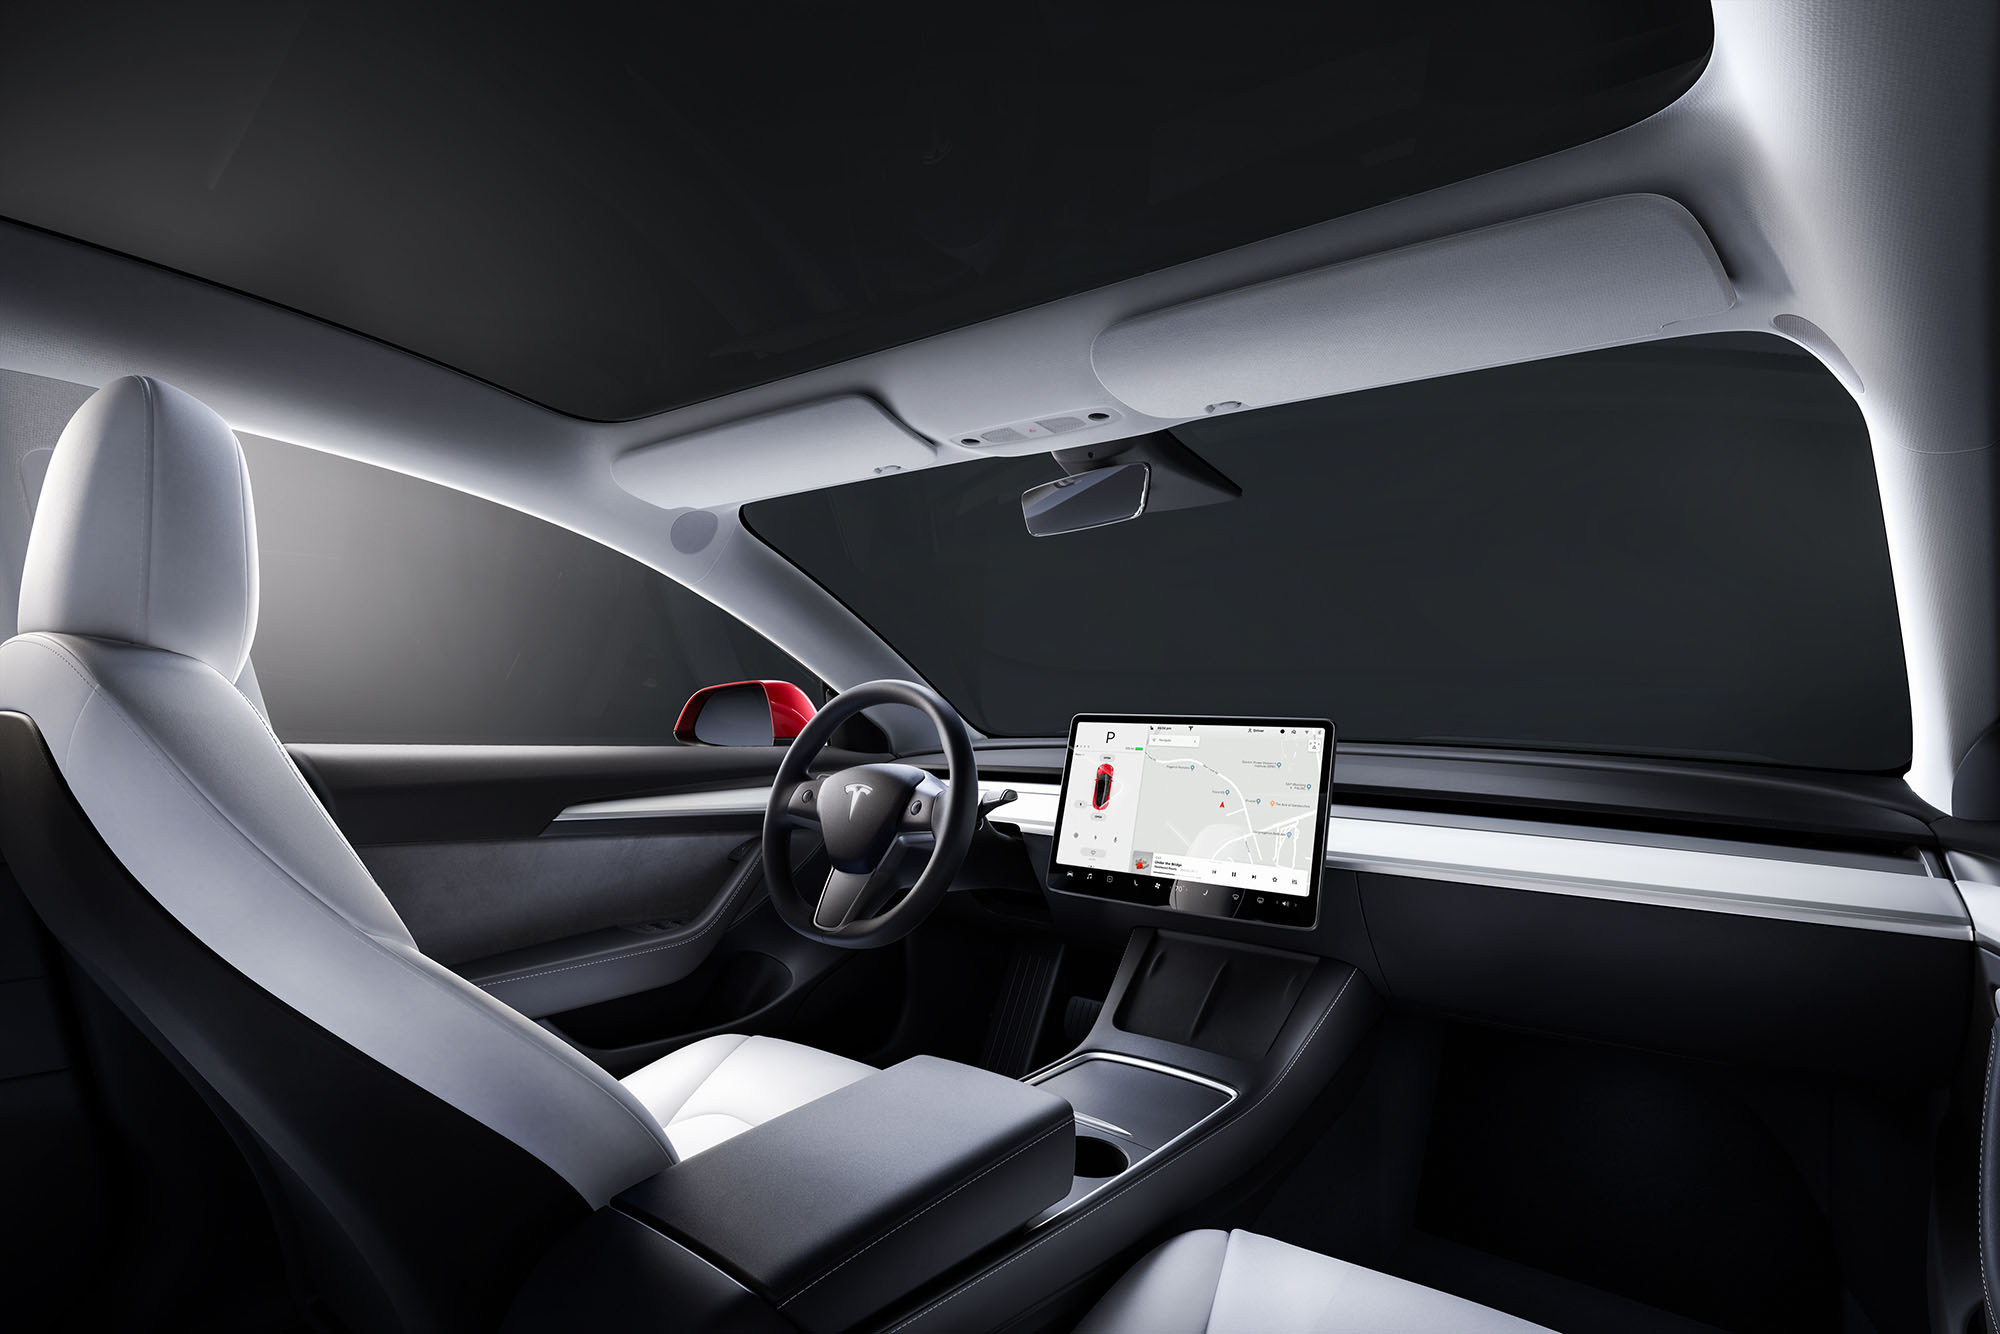 Steering wheel, dashboard, and driver's seat in Tesla Model 3